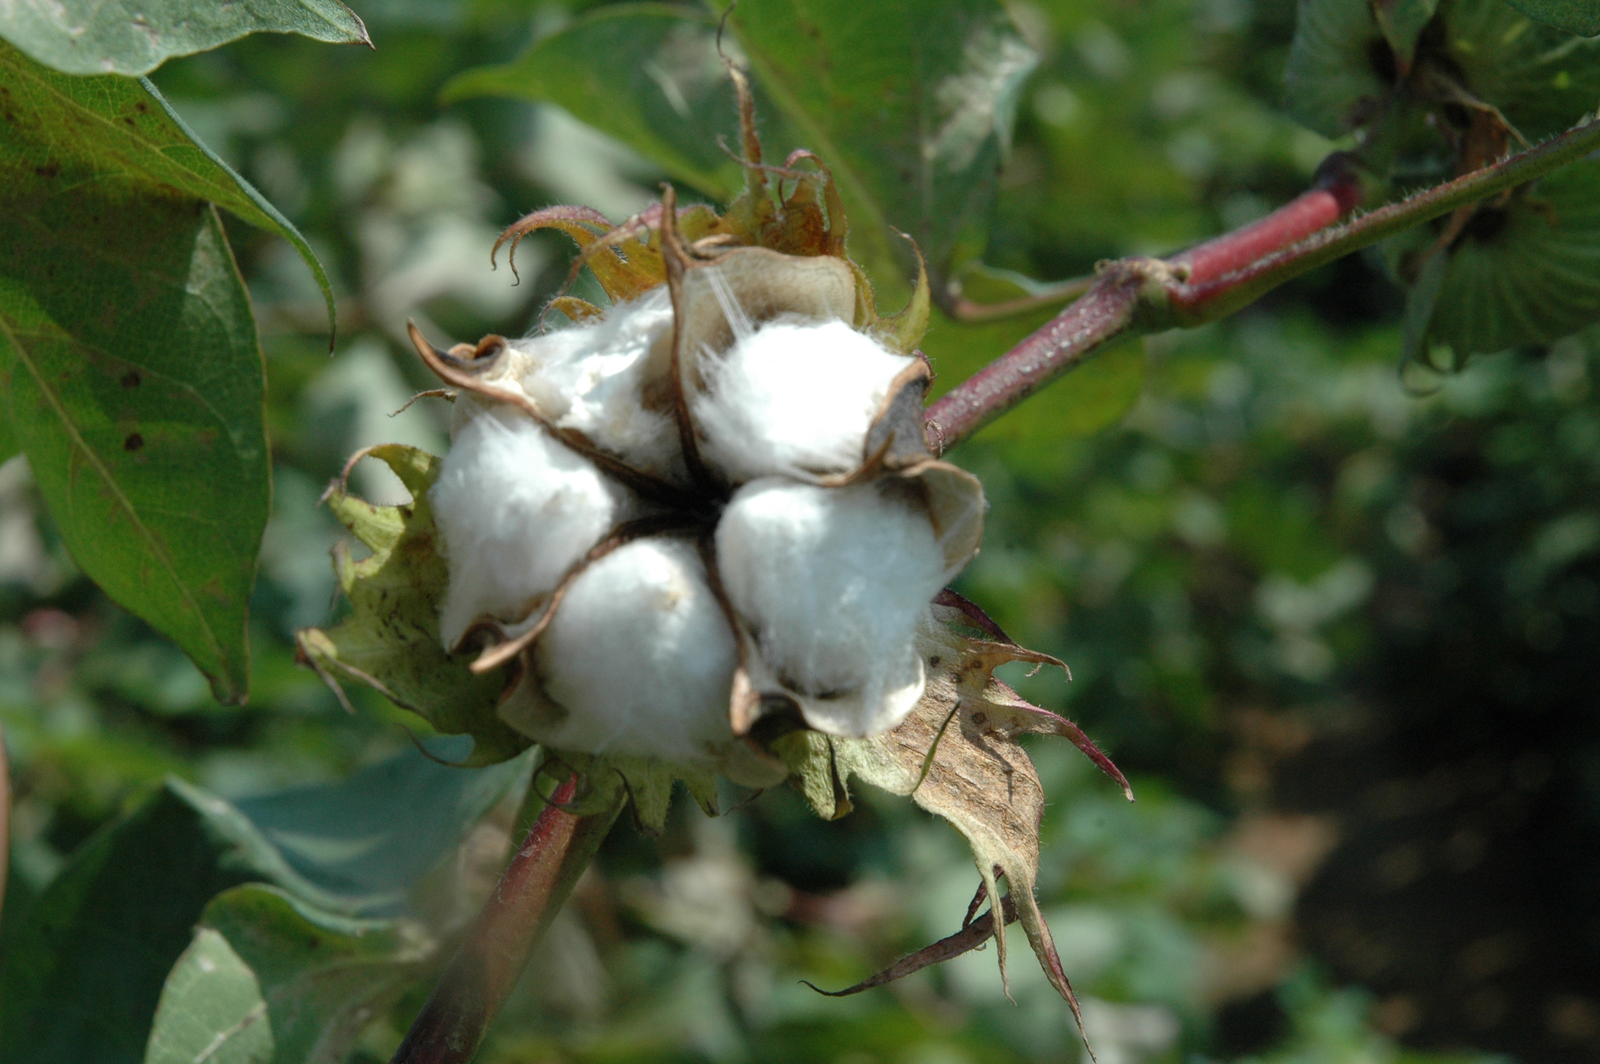 An opening cotton boll